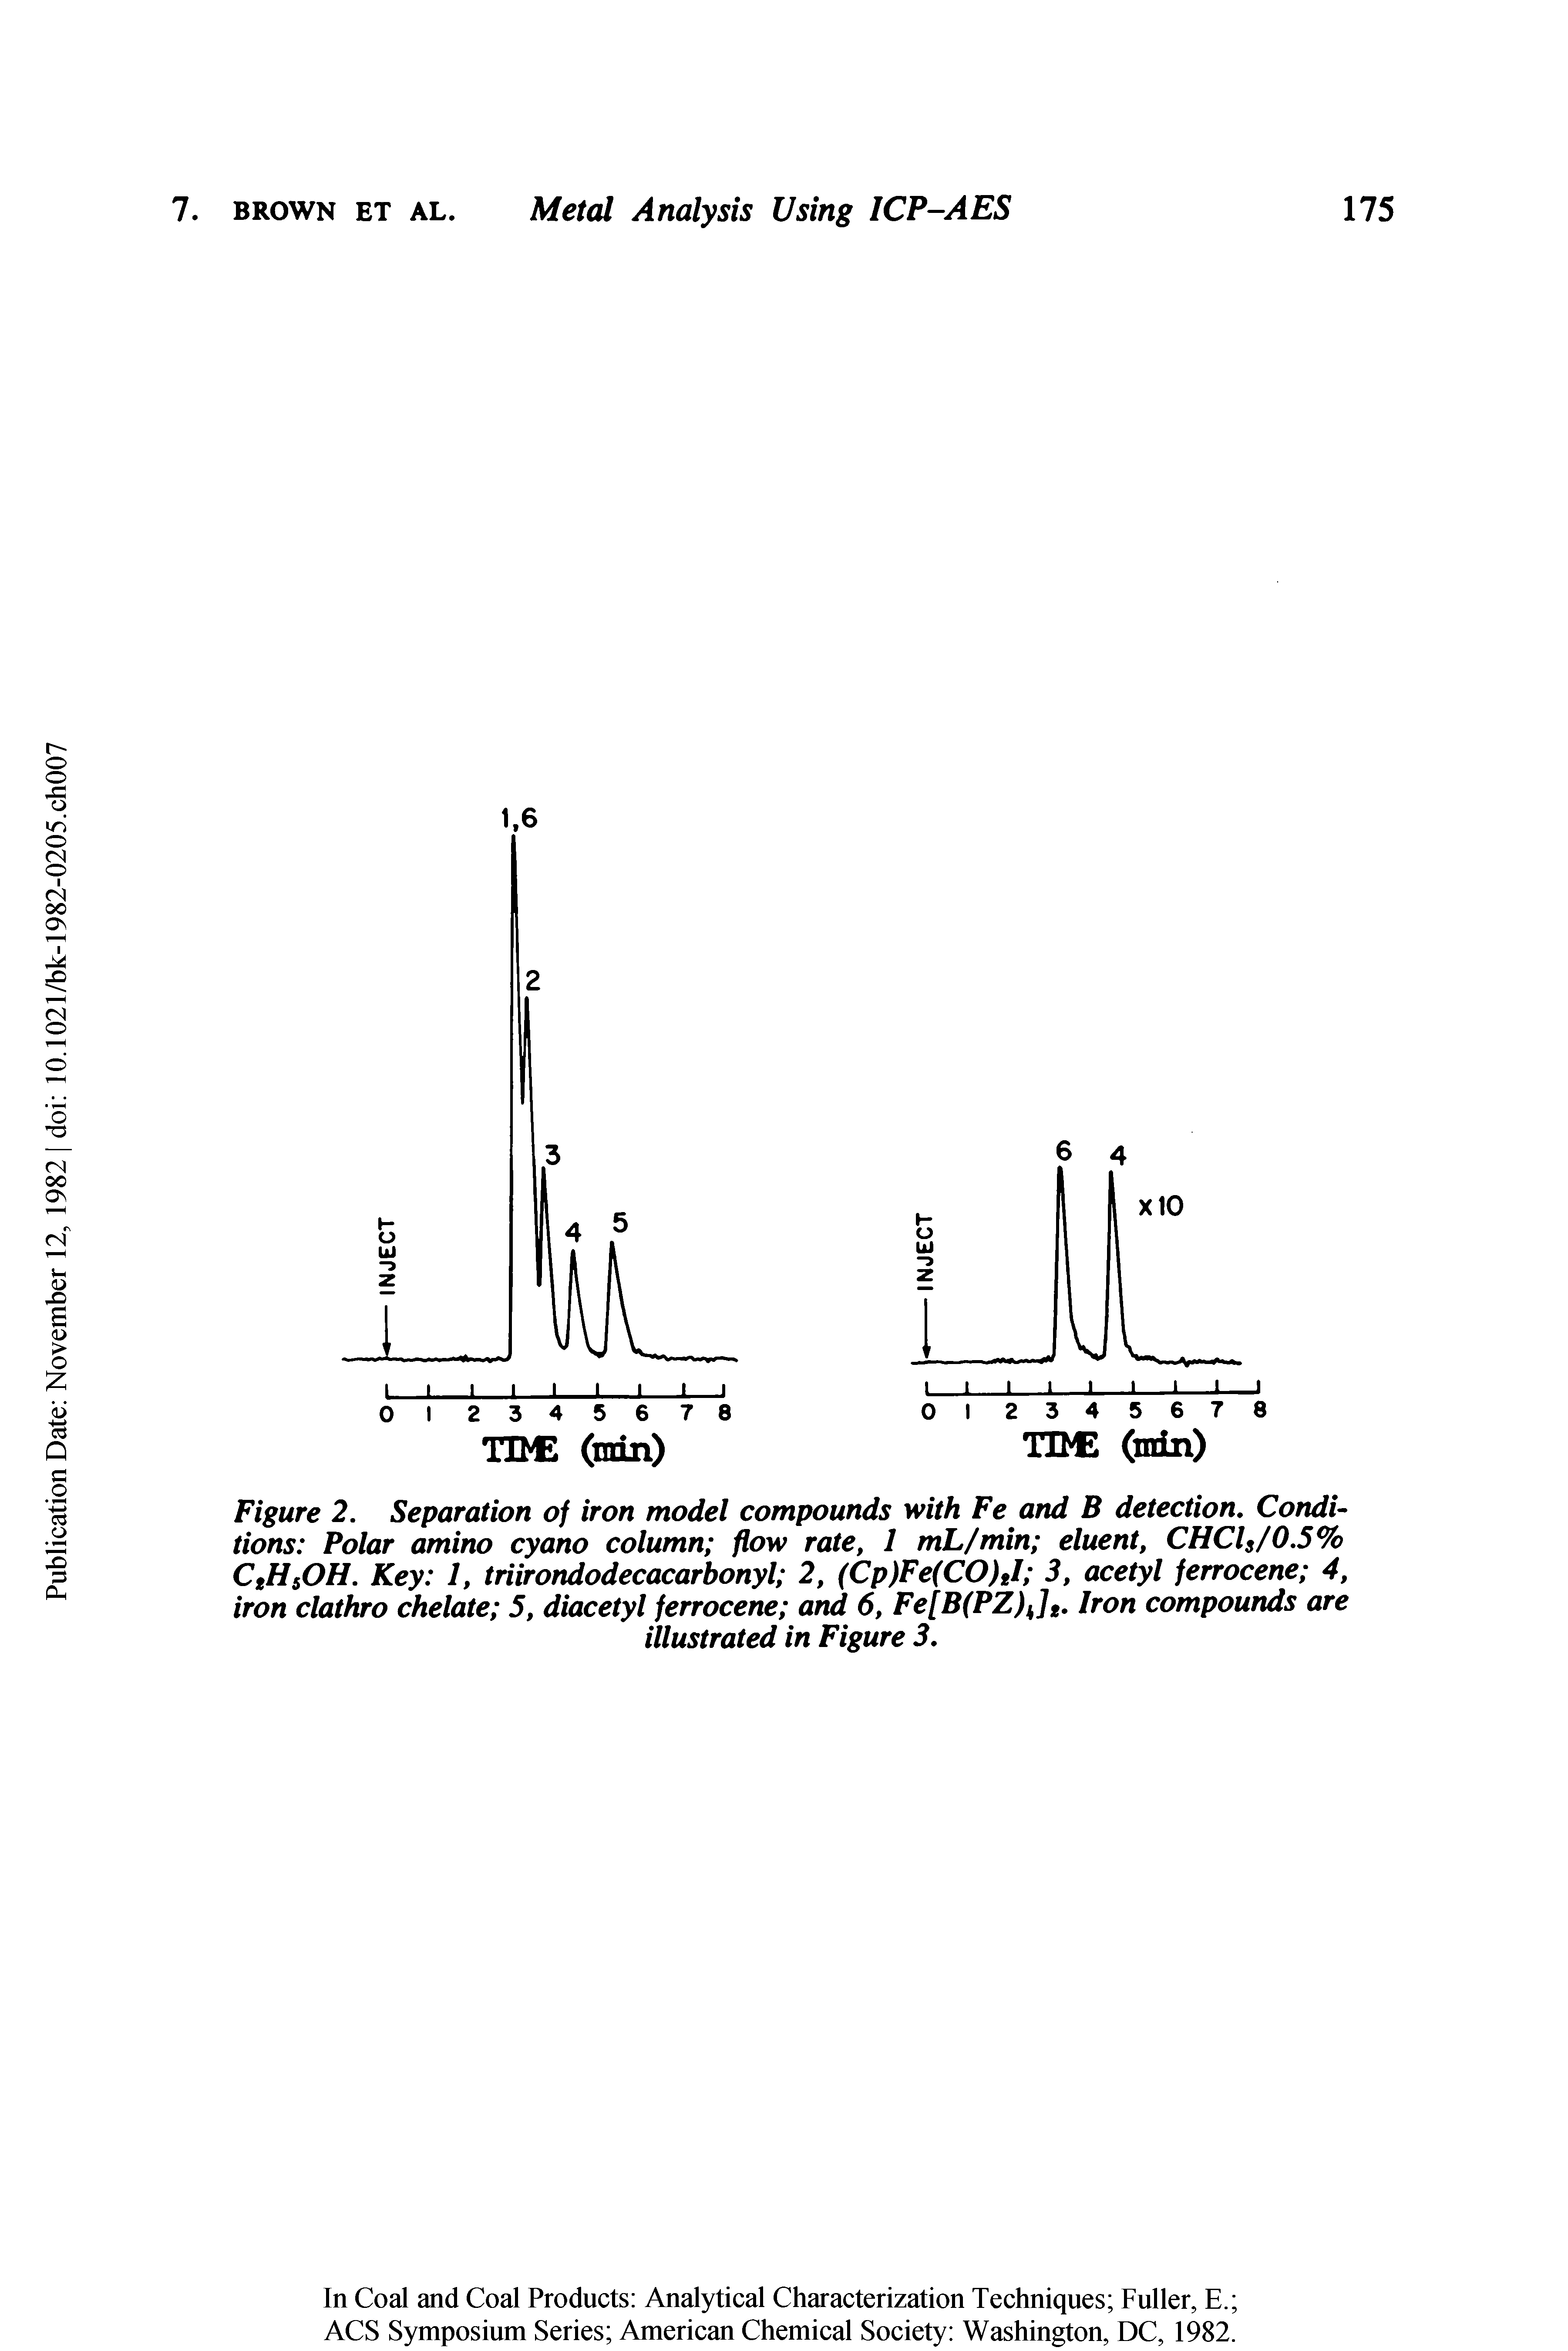 Figure 2. Separation of iron model compounds with Fe and B detection. Conditions Polar amino cyano column flow rate, 1 mL/min eluent, CHCls/0.5% CtHsOH. Key 1, triirondodecacarbonyl 2, (Cp)Fe(CO)J 3, acetyl ferrocene 4, iron clathro chelate 5, diacetyl ferrocene and 6, Fe[B(PZ)Jt, Iron compouruts are...